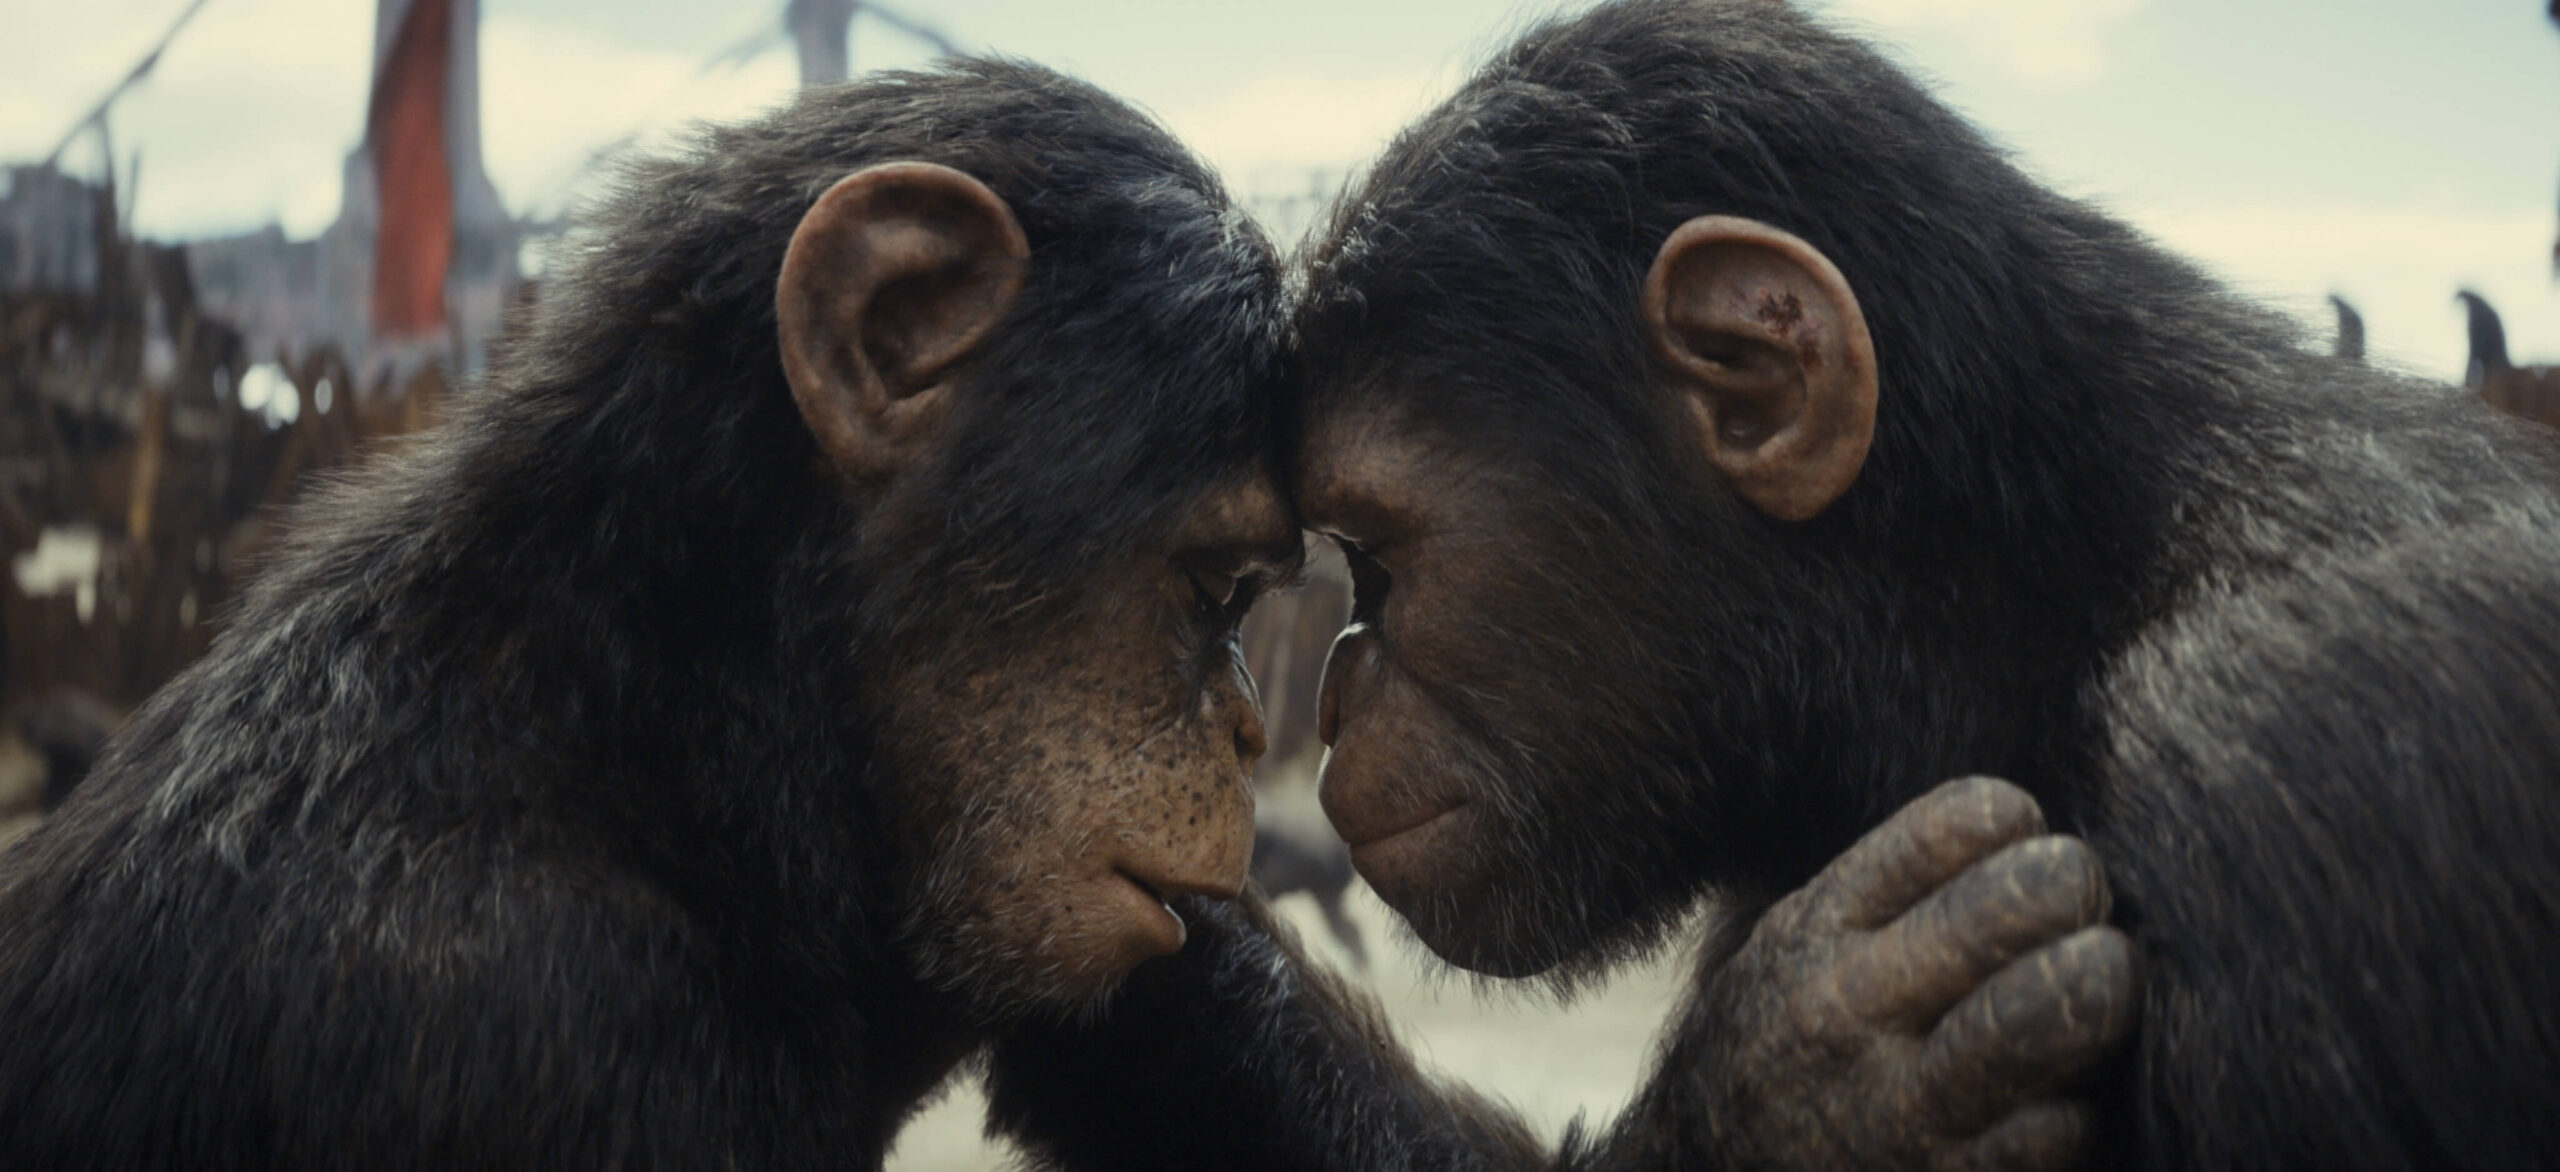 Kingdom of the Planet of the Apes (Disney)